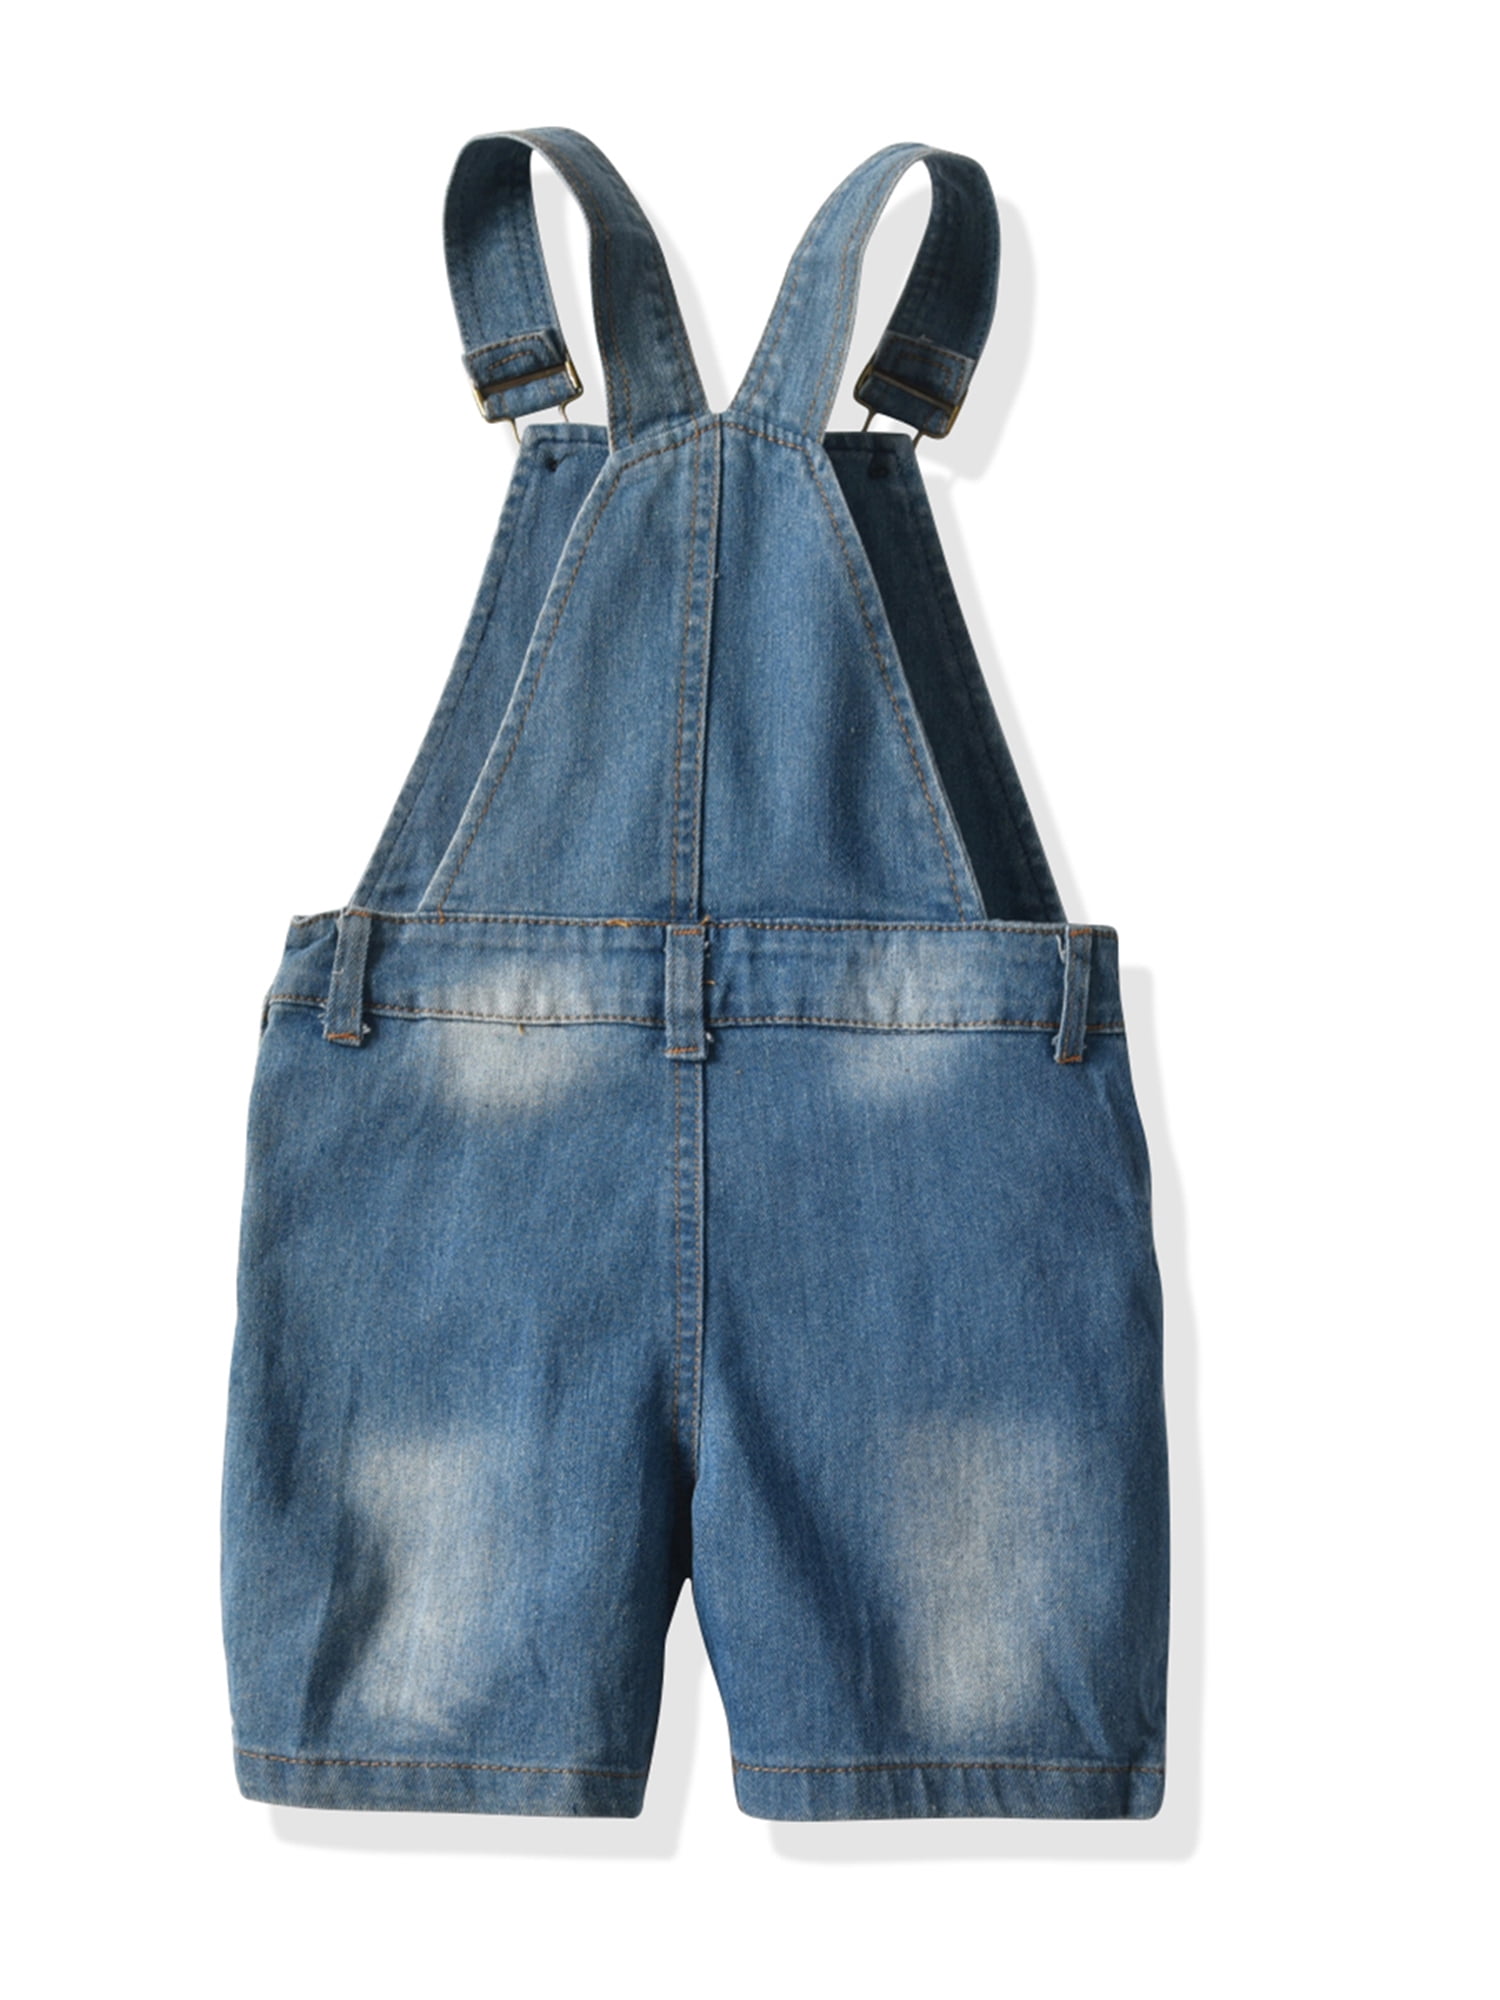 Nokpsedcb New Baby Boys Girls Cute Strap Solid Color Overalls Bottoms Pants 